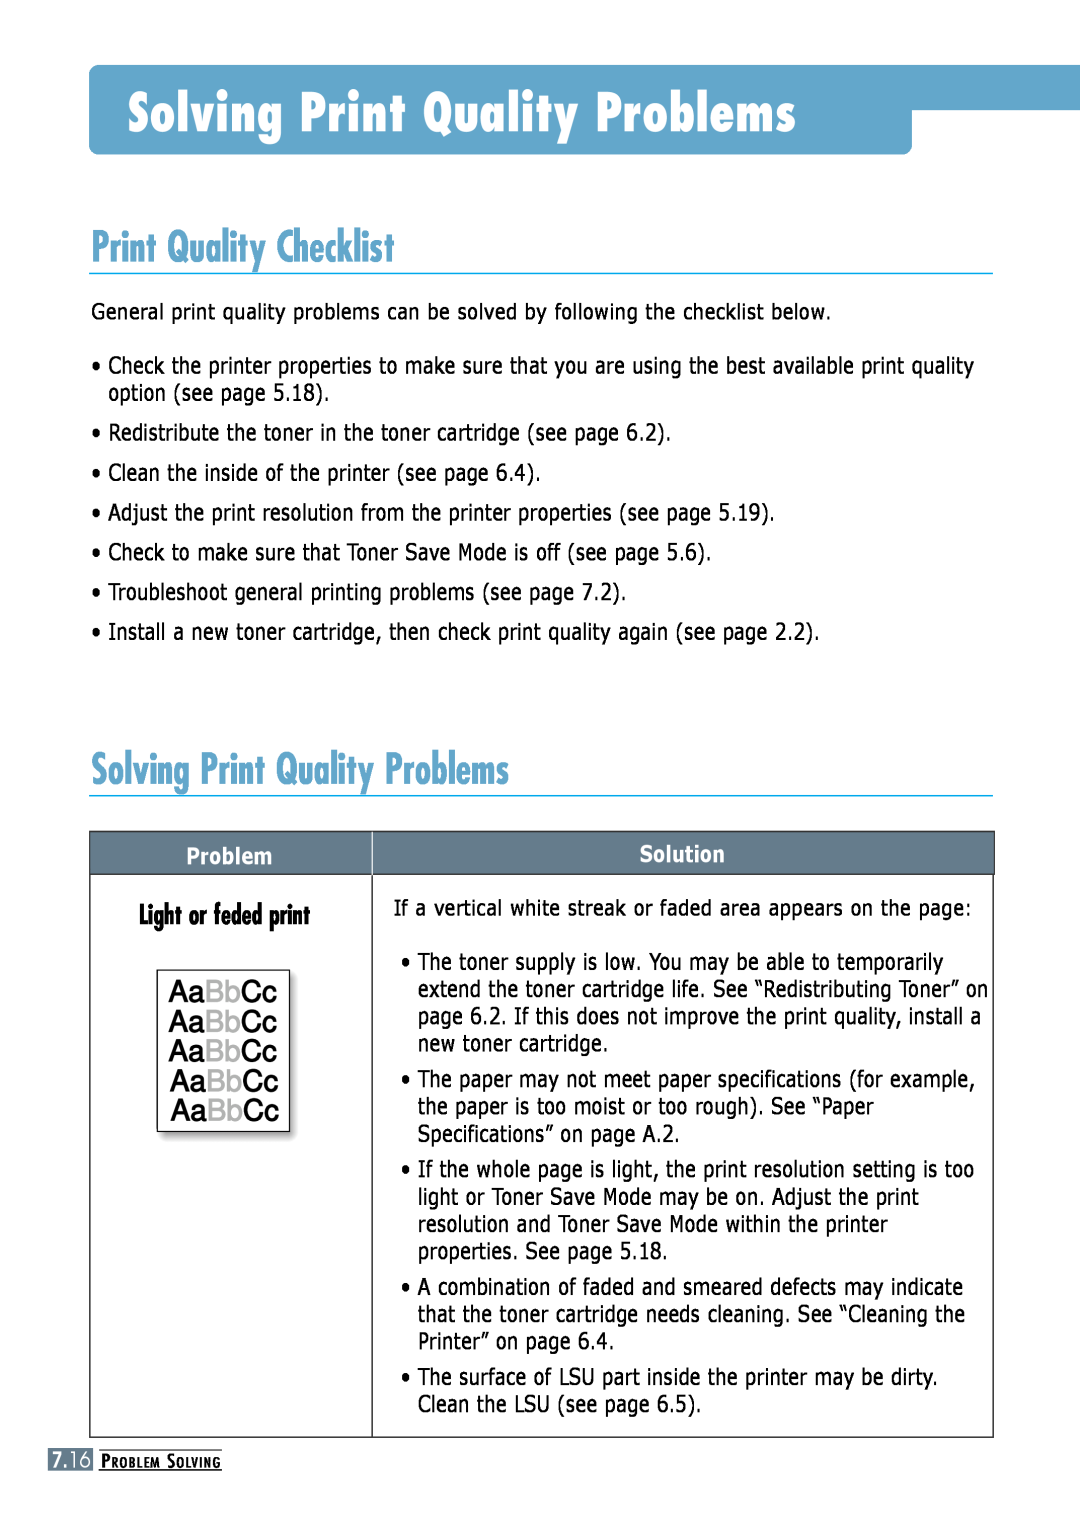 Samsung ML-6060S manual Solving Print Quality Problems, Print Quality Checklist, Light or feded print, Aa BbCc, Solution 